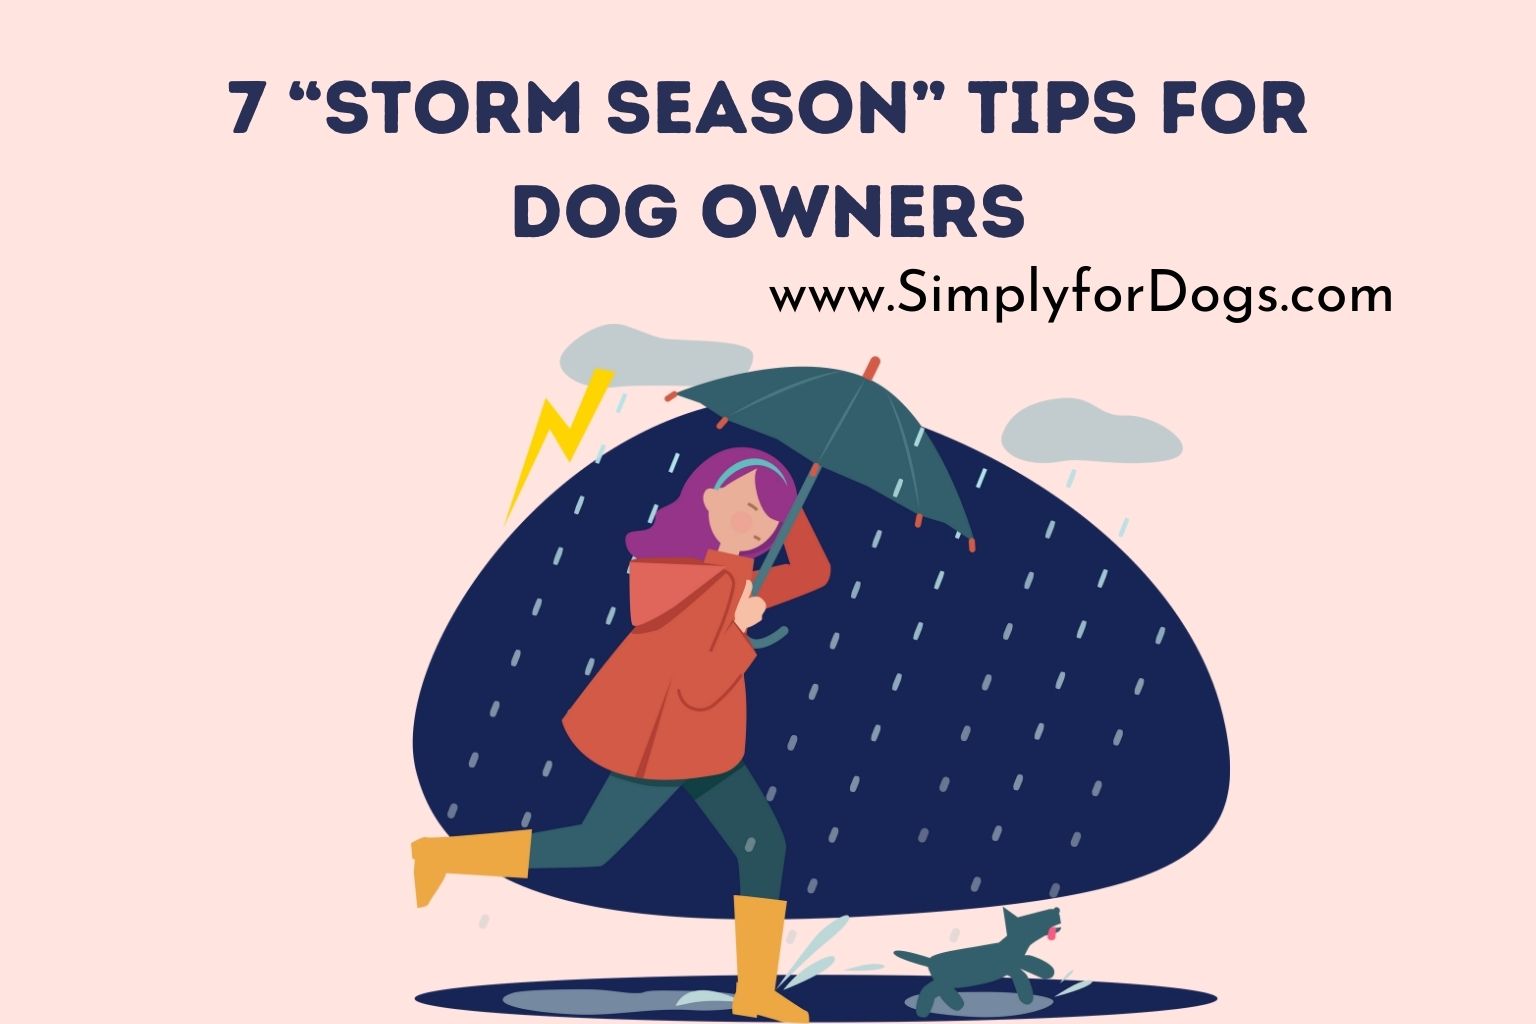 7 “Storm Season” Tips for Dog Owners